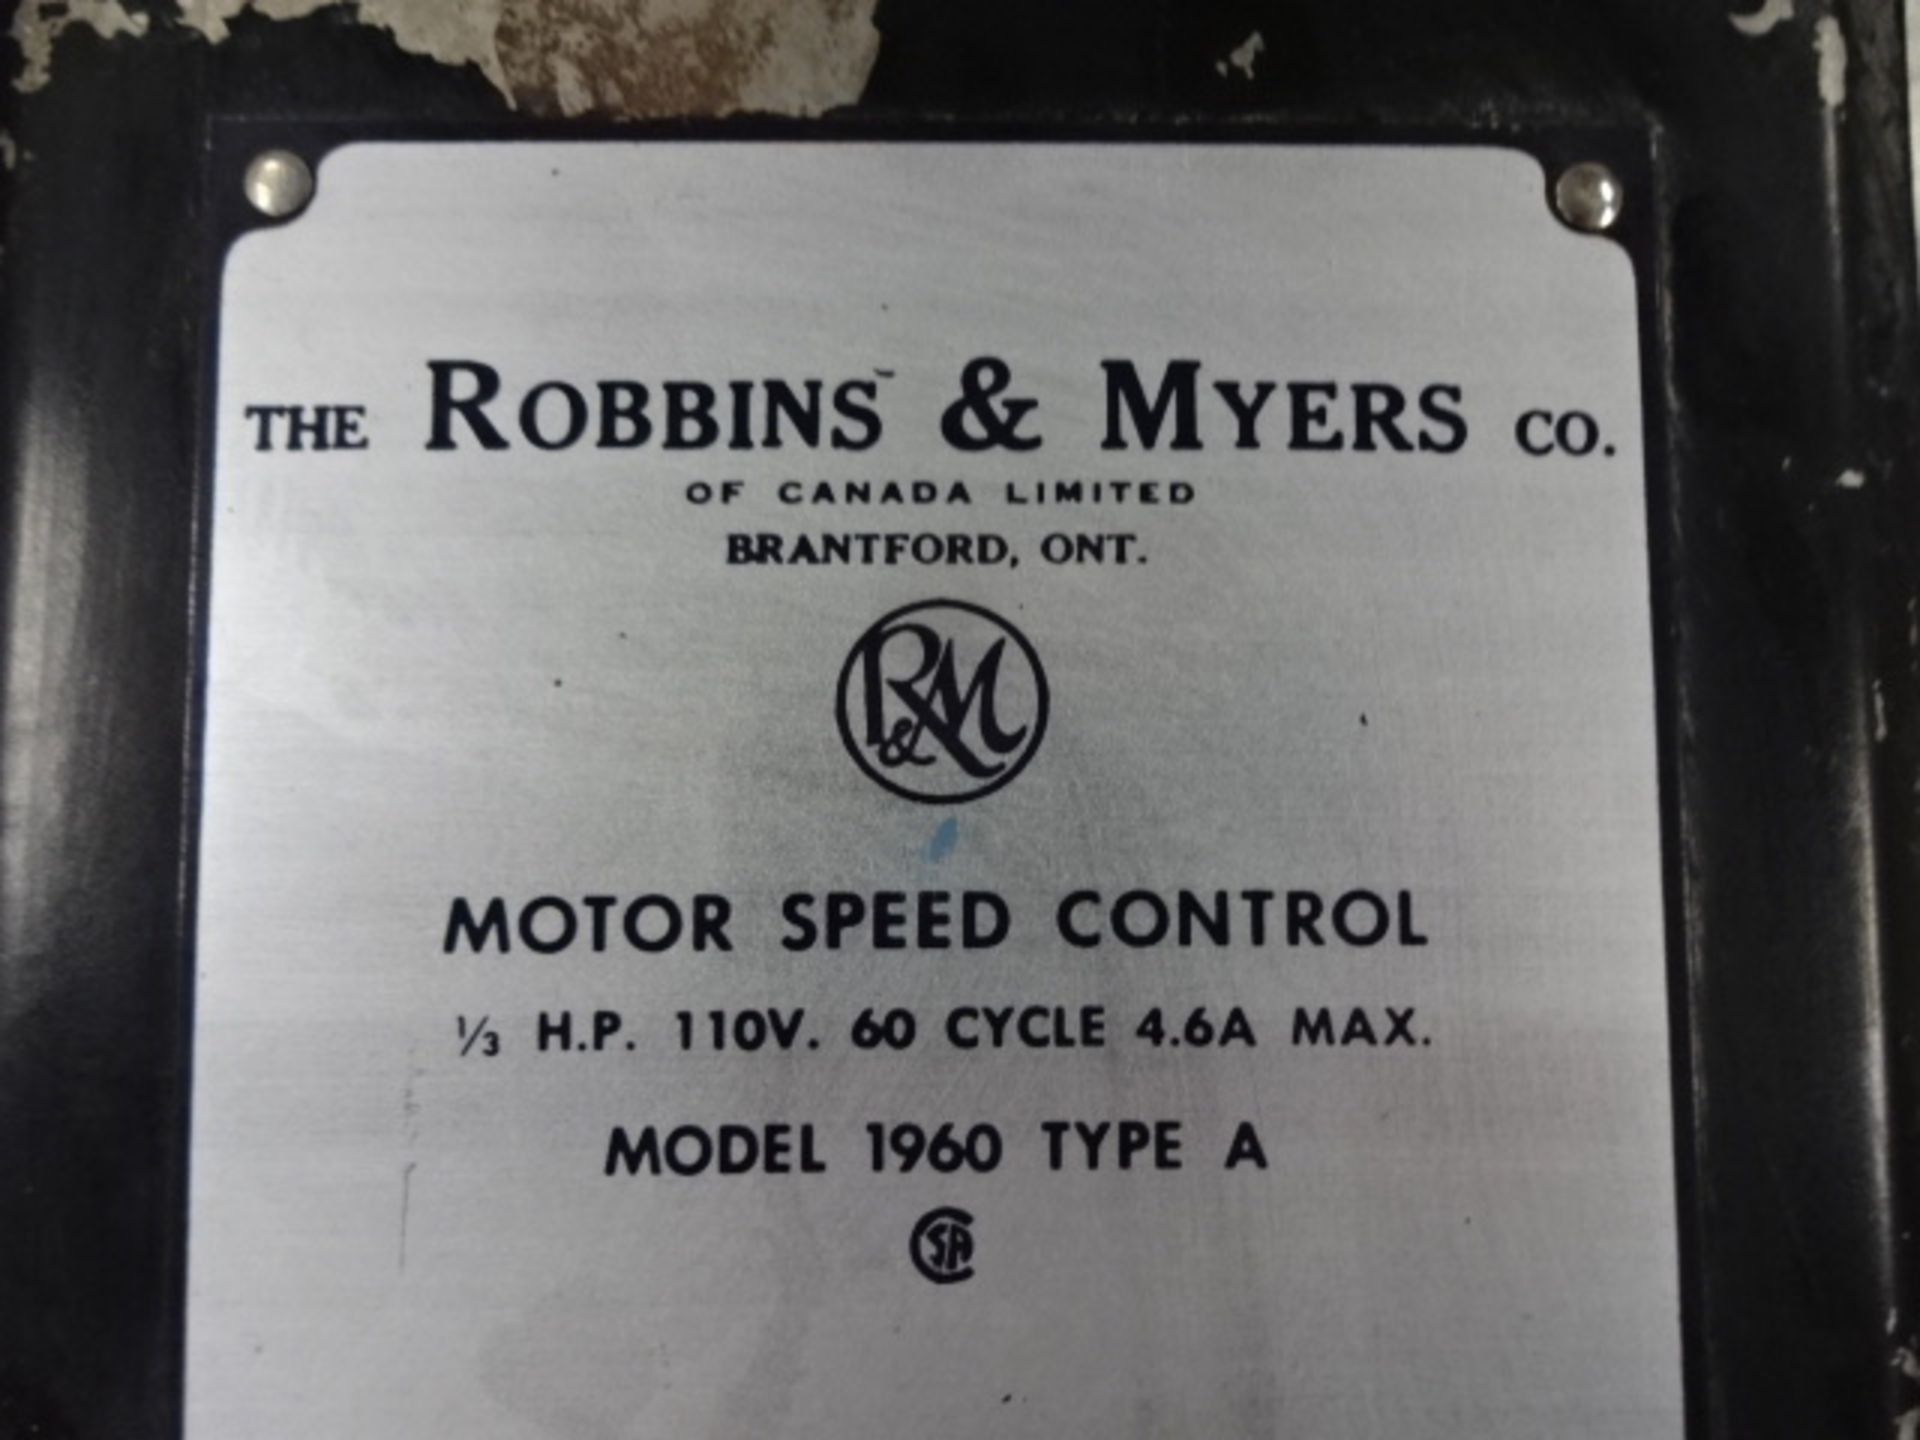 Robbins & Myers co. Motor Speed Control 1/3 HP 110V - Image 2 of 2